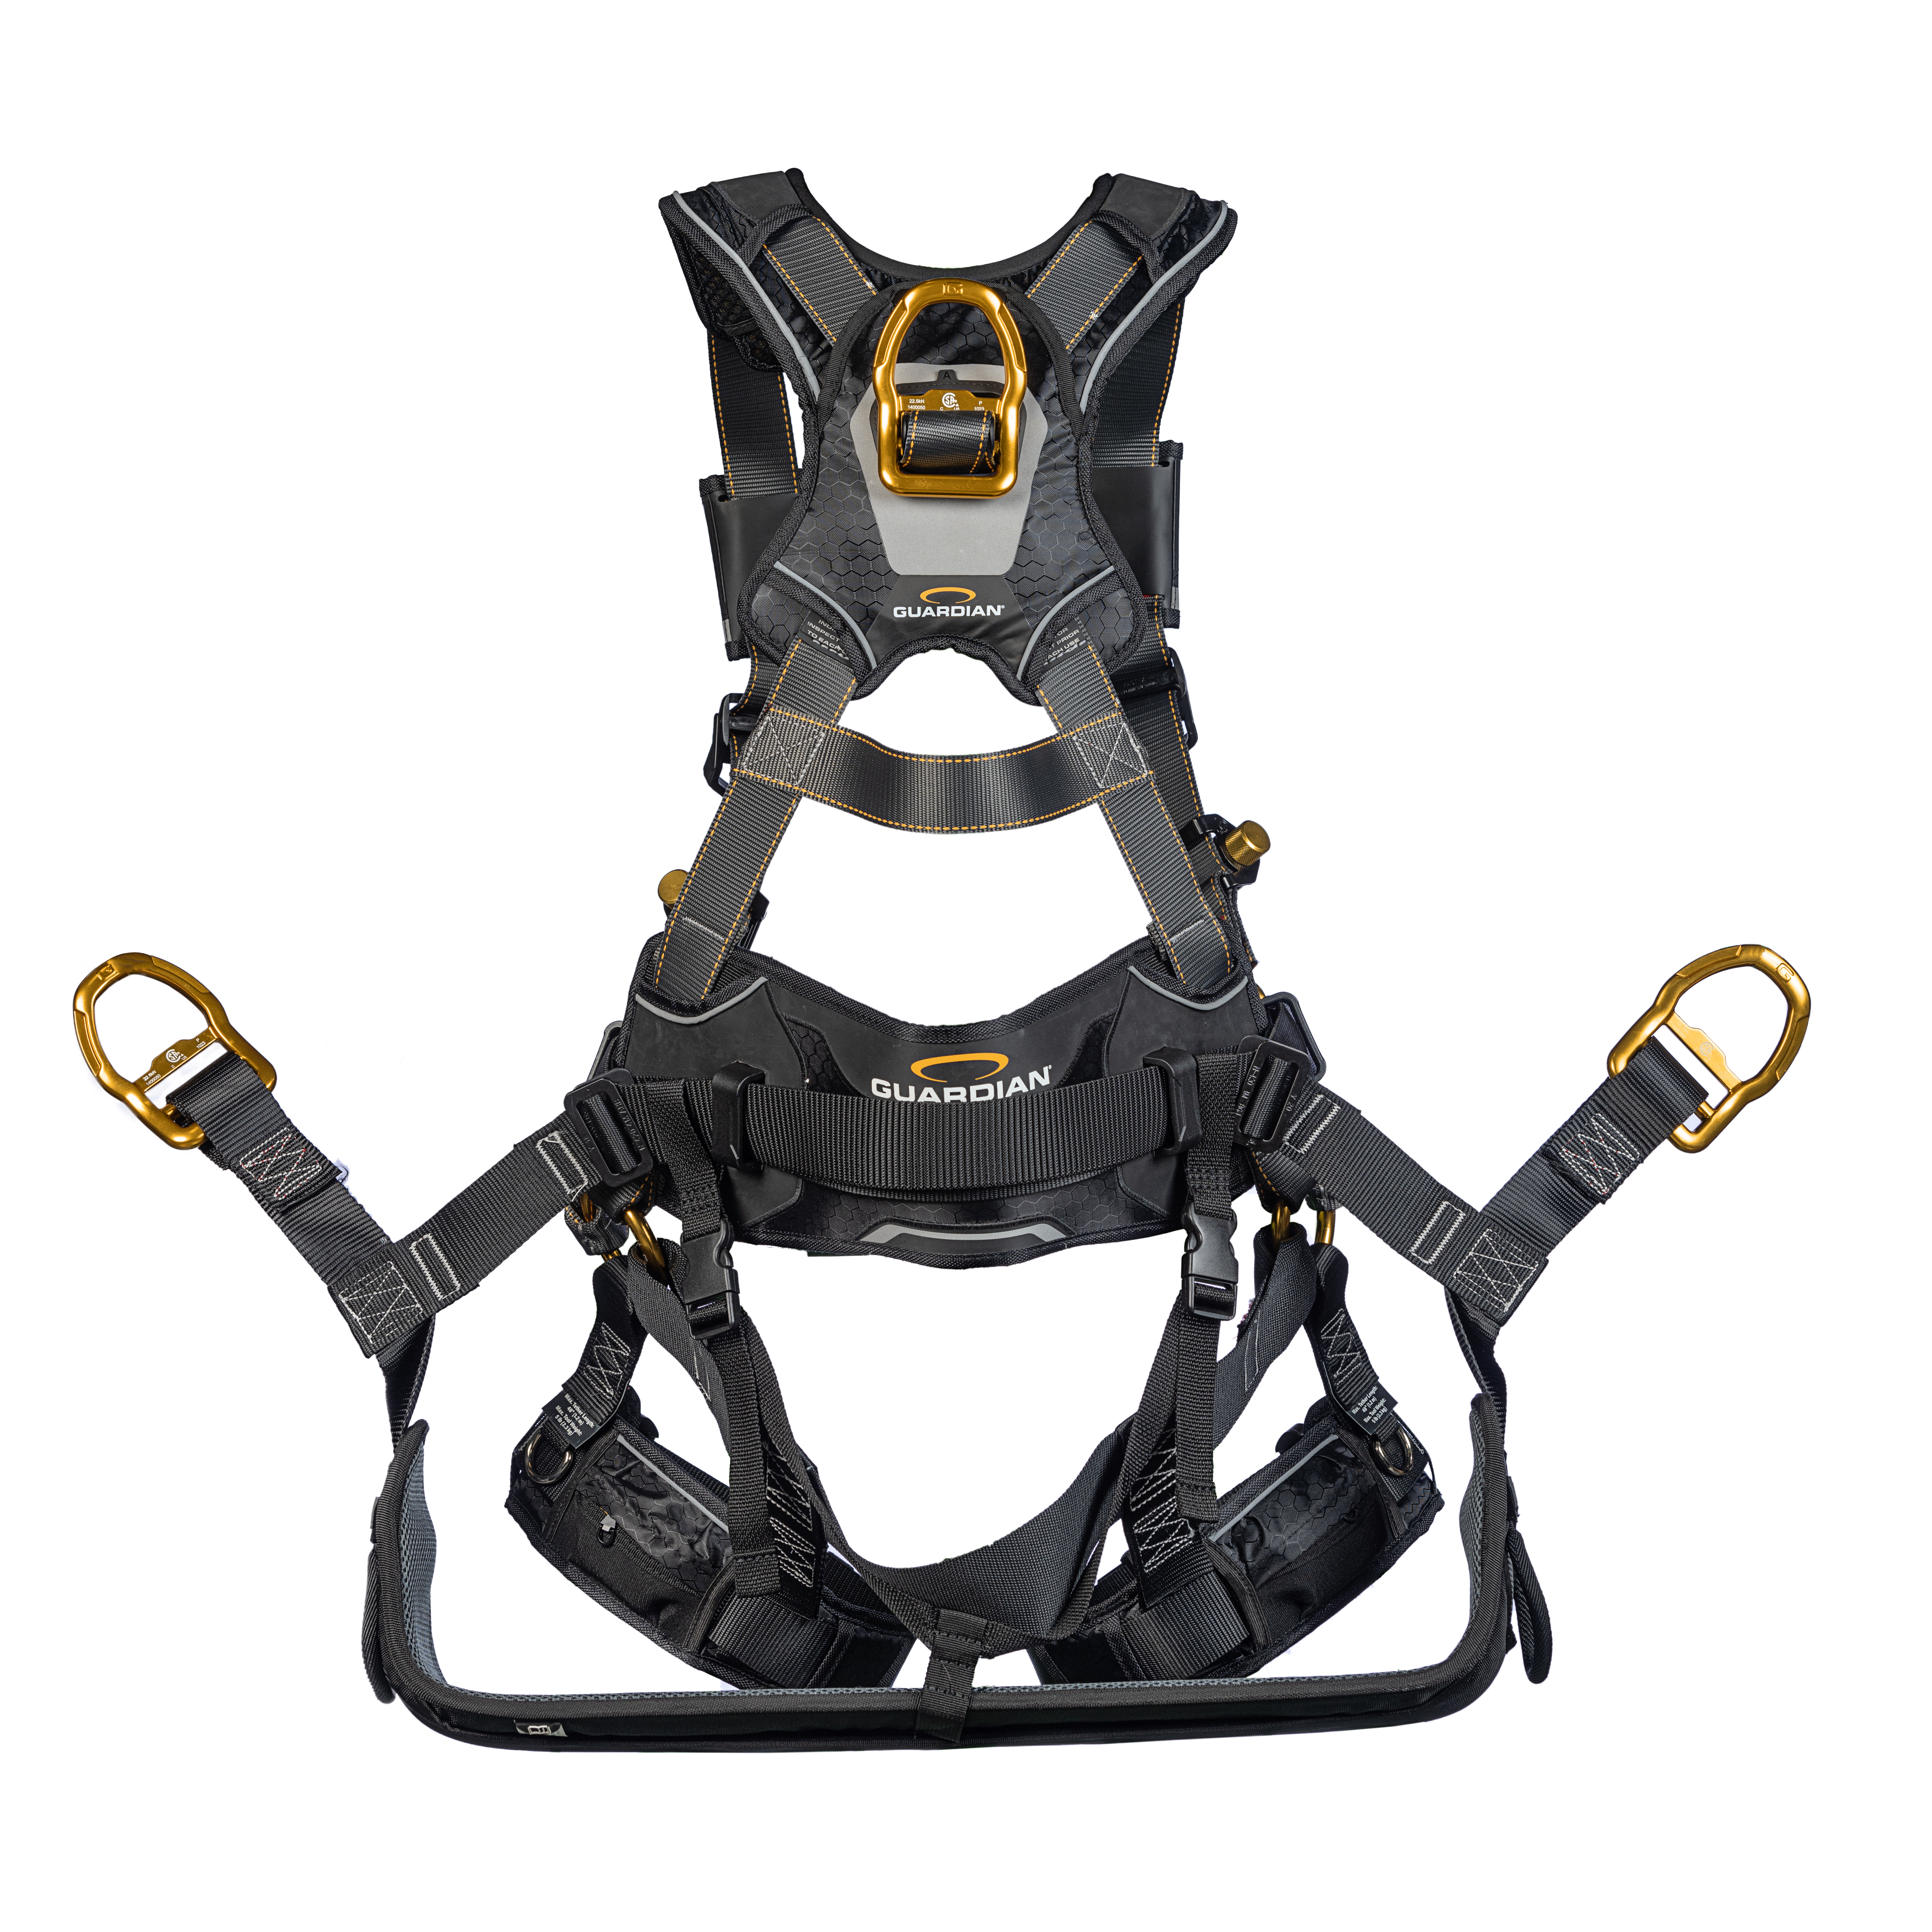 Guardian B7-Comfort Tower Climbing Harness from GME Supply